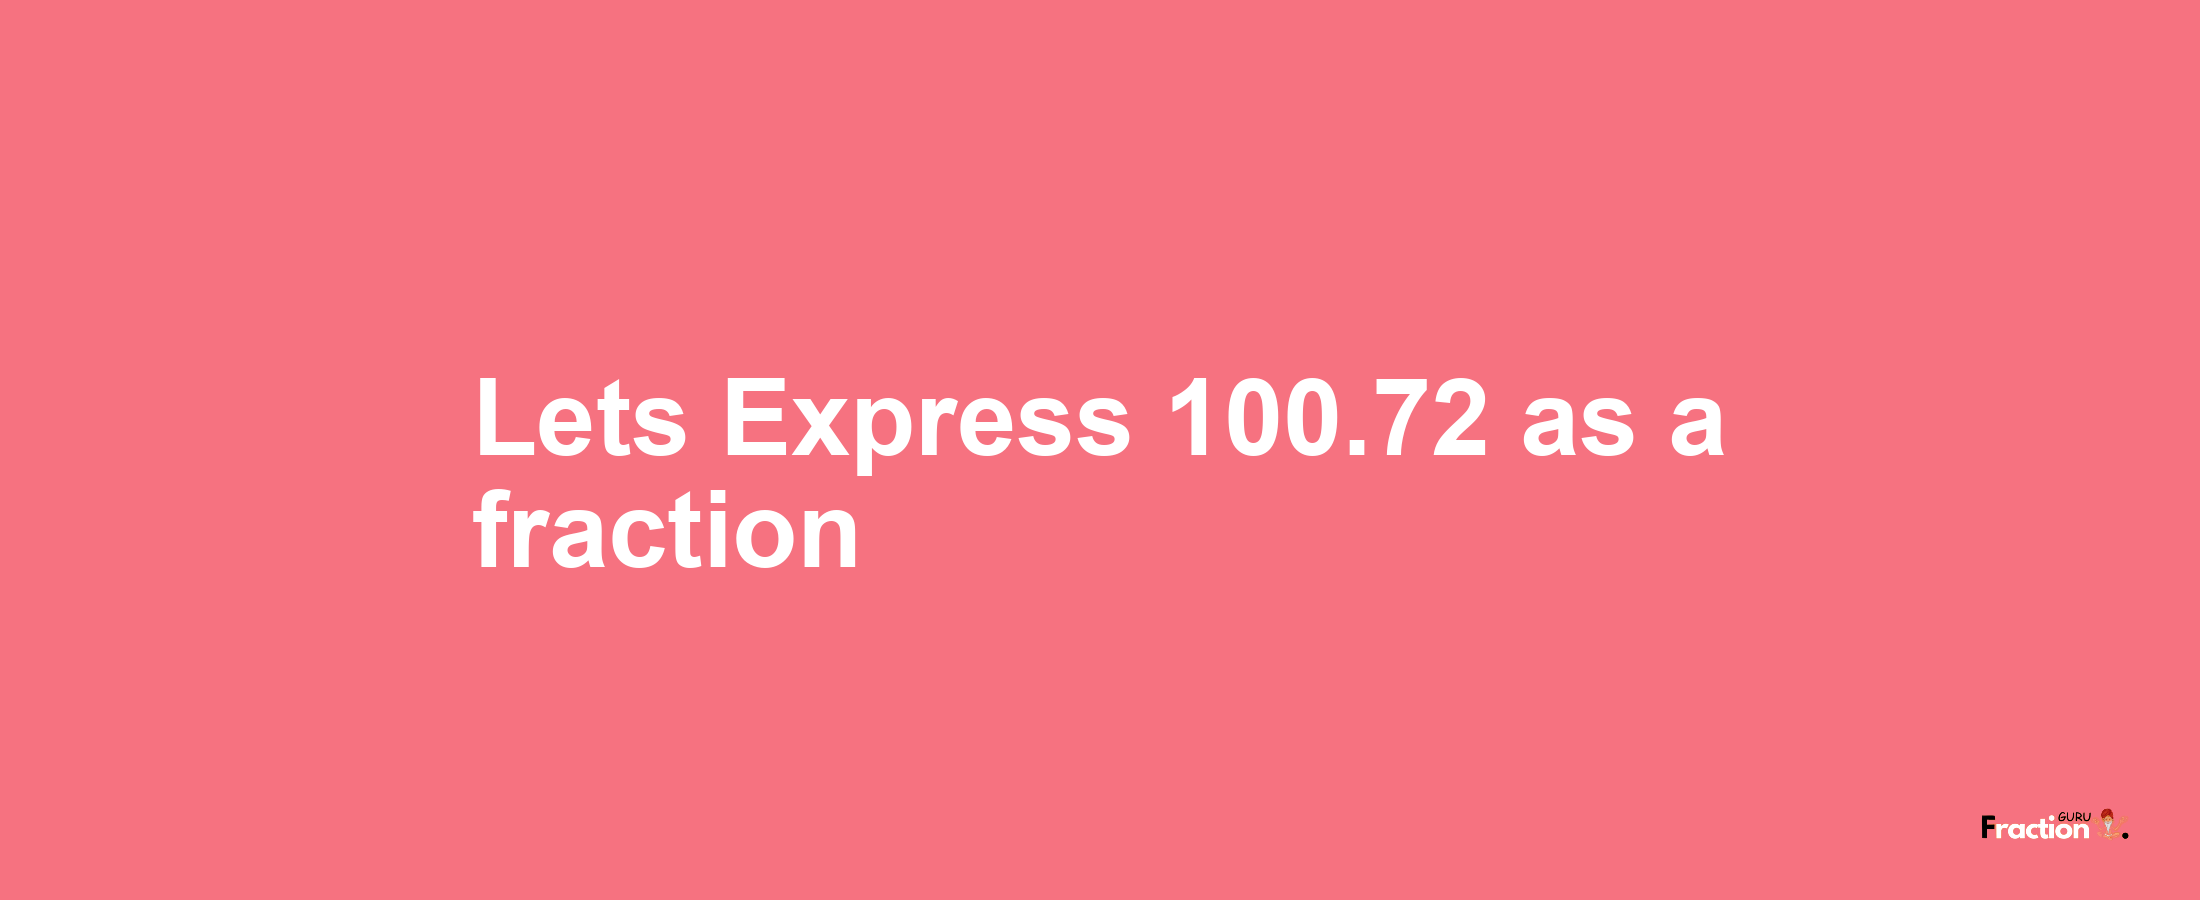 Lets Express 100.72 as afraction